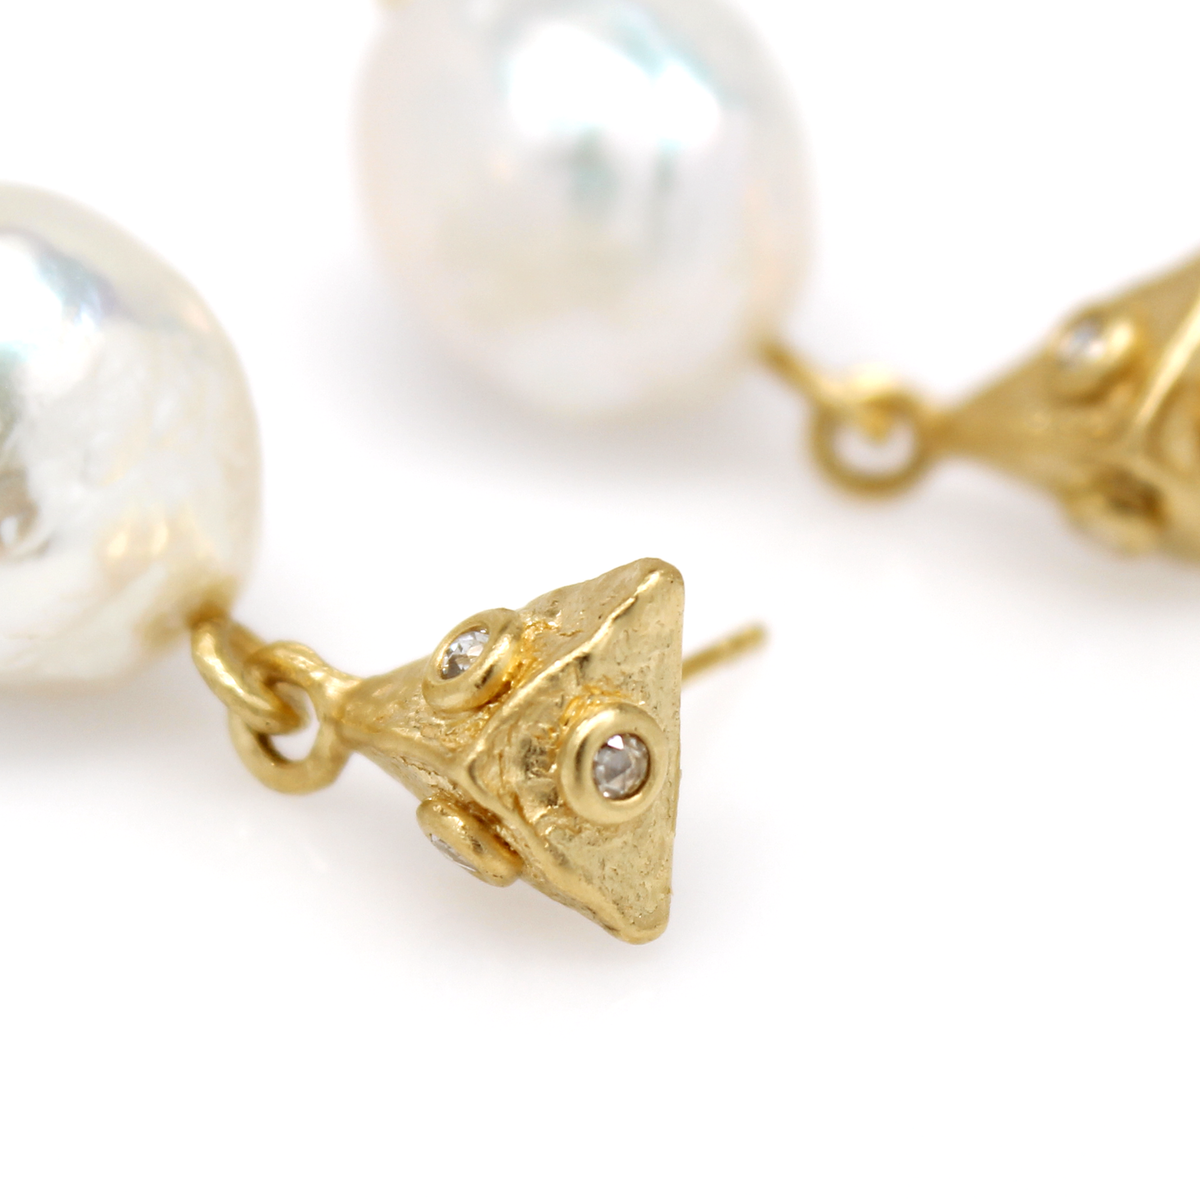 One-of-a-Kind Baroque Pearl Drops with Diamonds